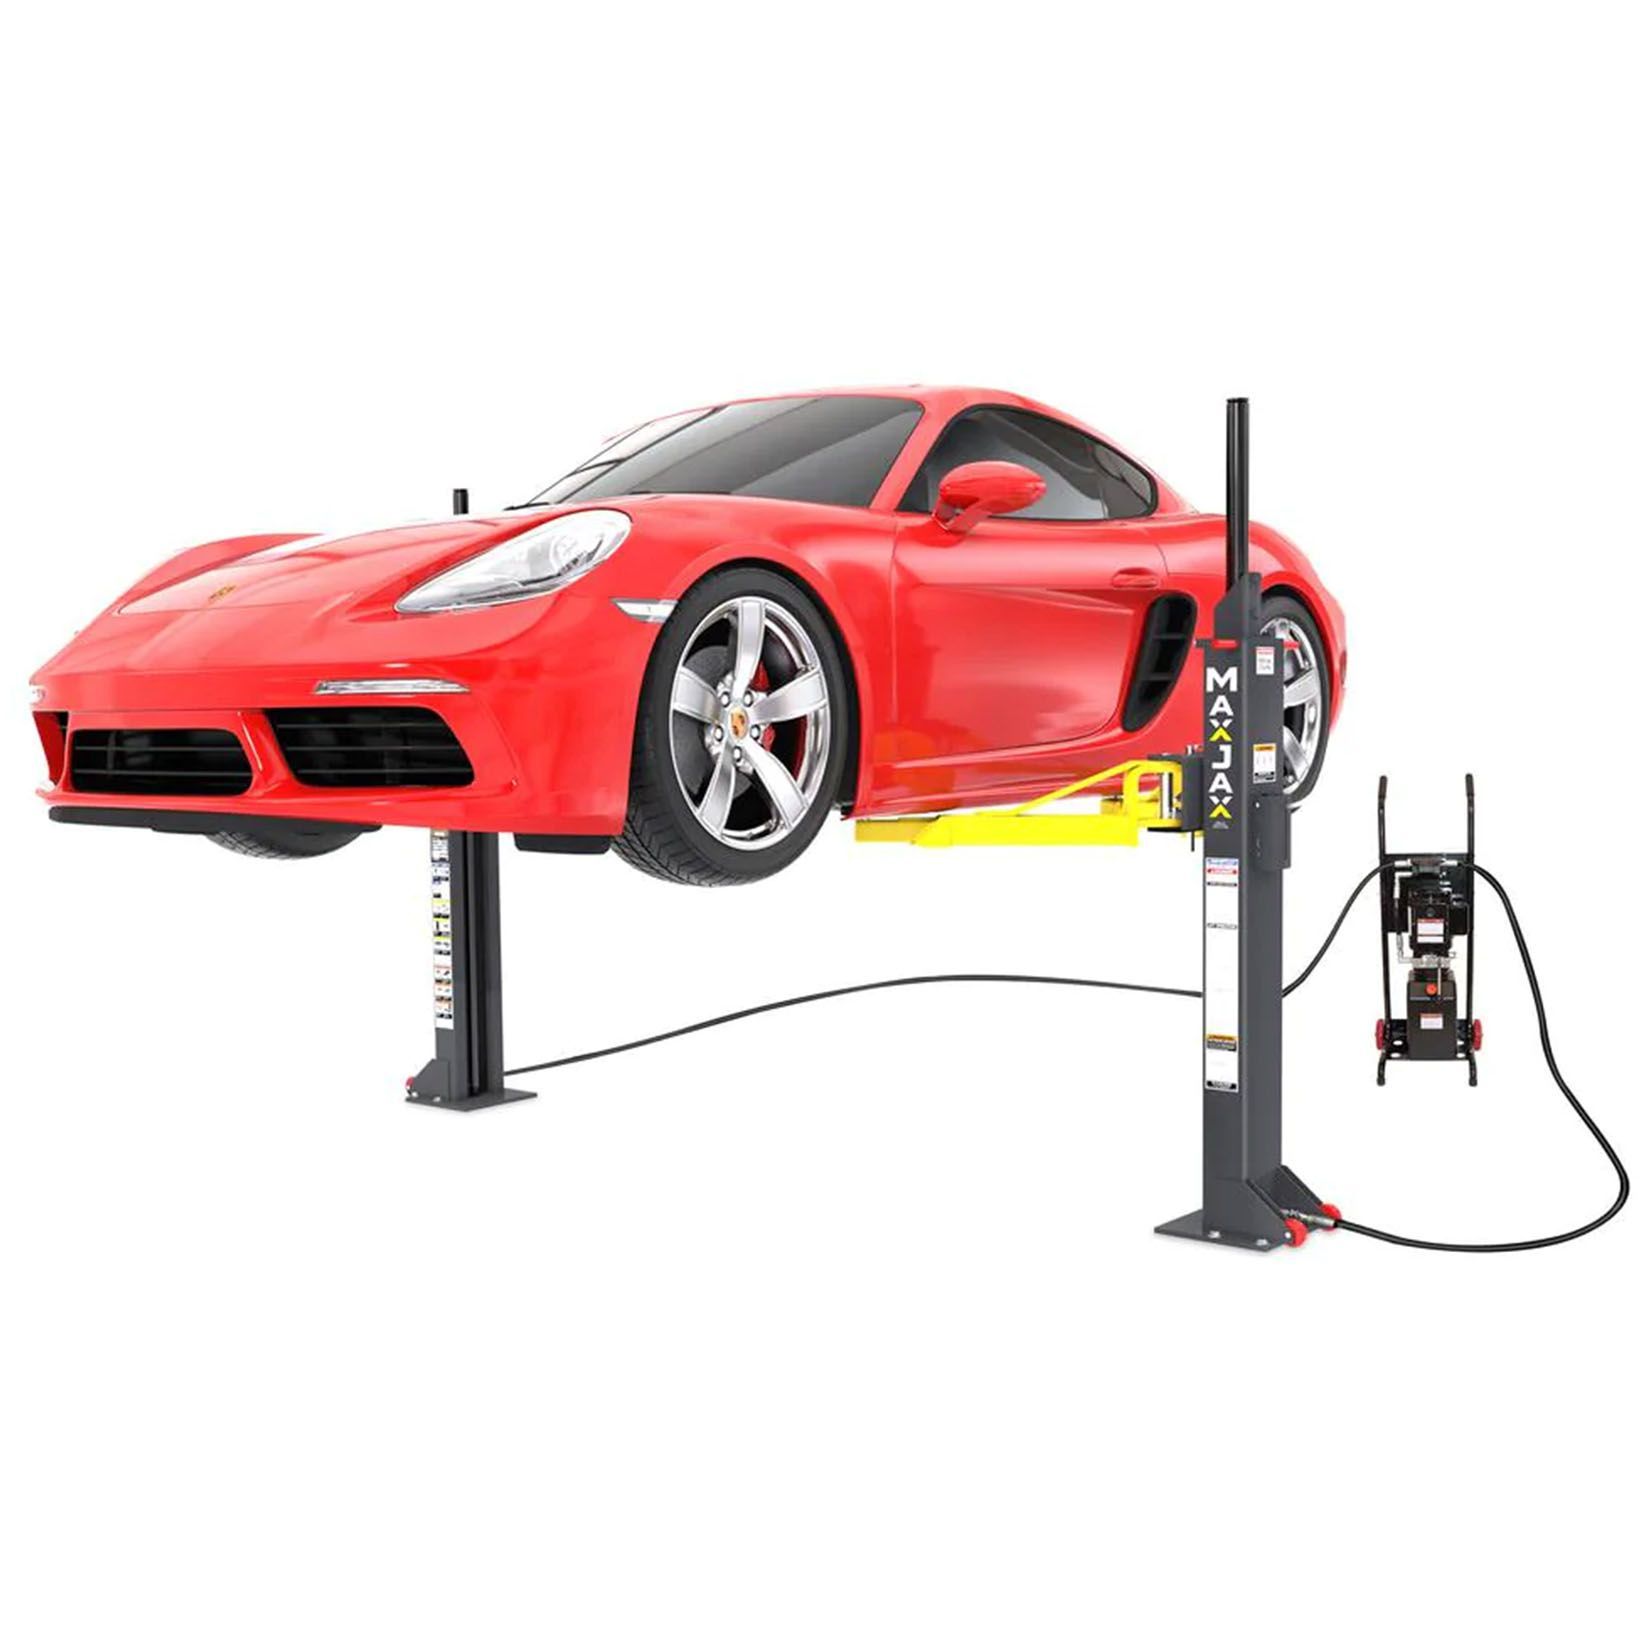 Vehicle Lifts For Your Home Garage, Best Lift For Home Garage